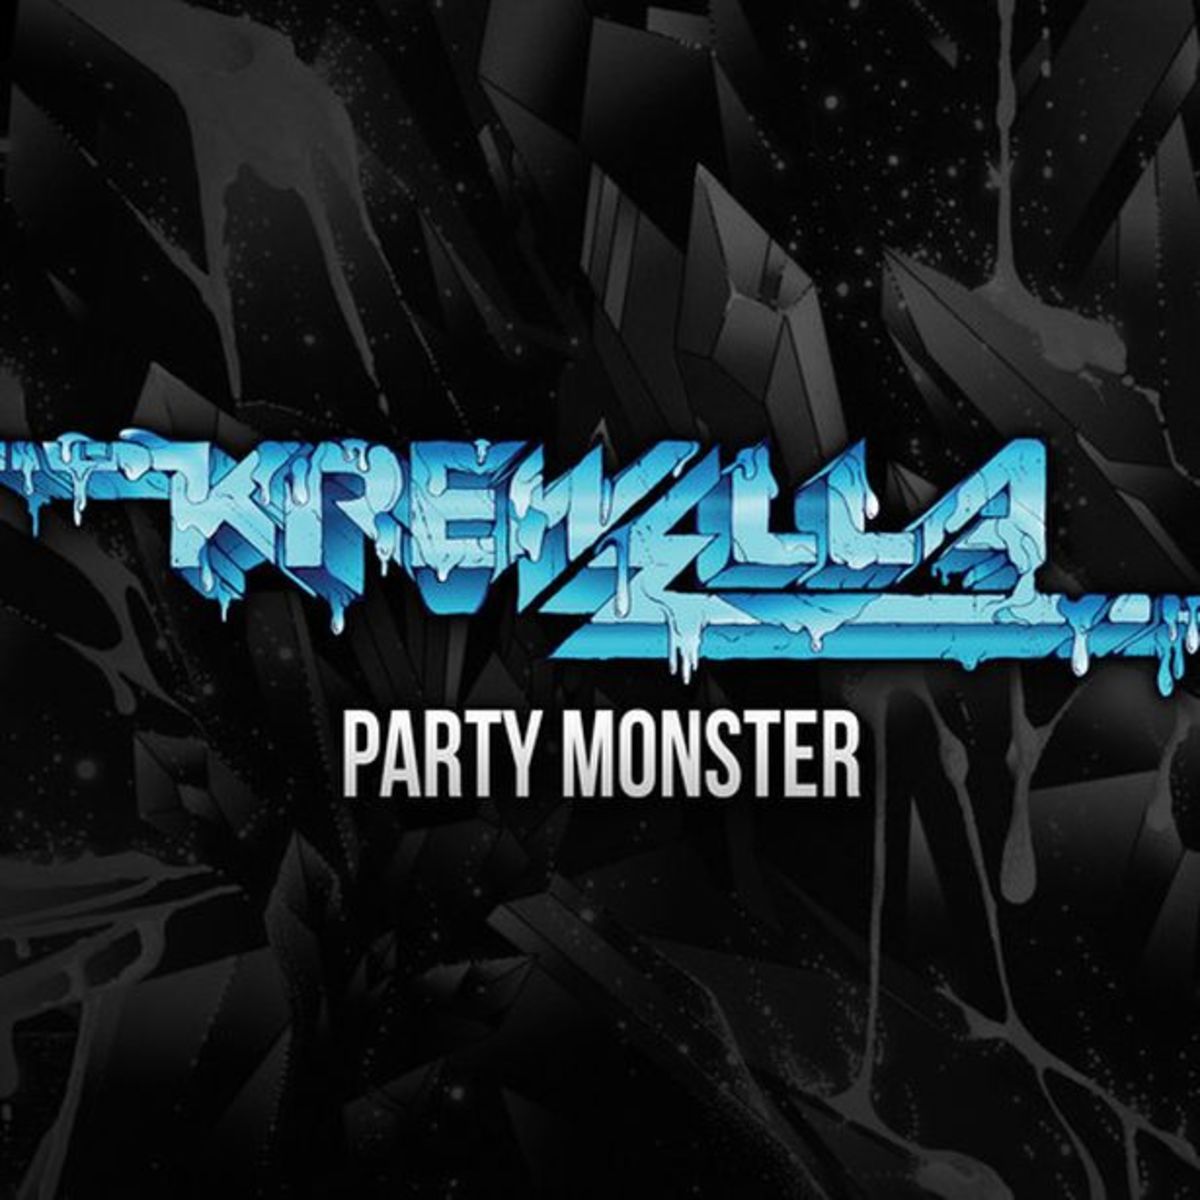 EDM Download: Krewella Shares "Party Monster" For Free; File Under 'Hardstyle Territory'